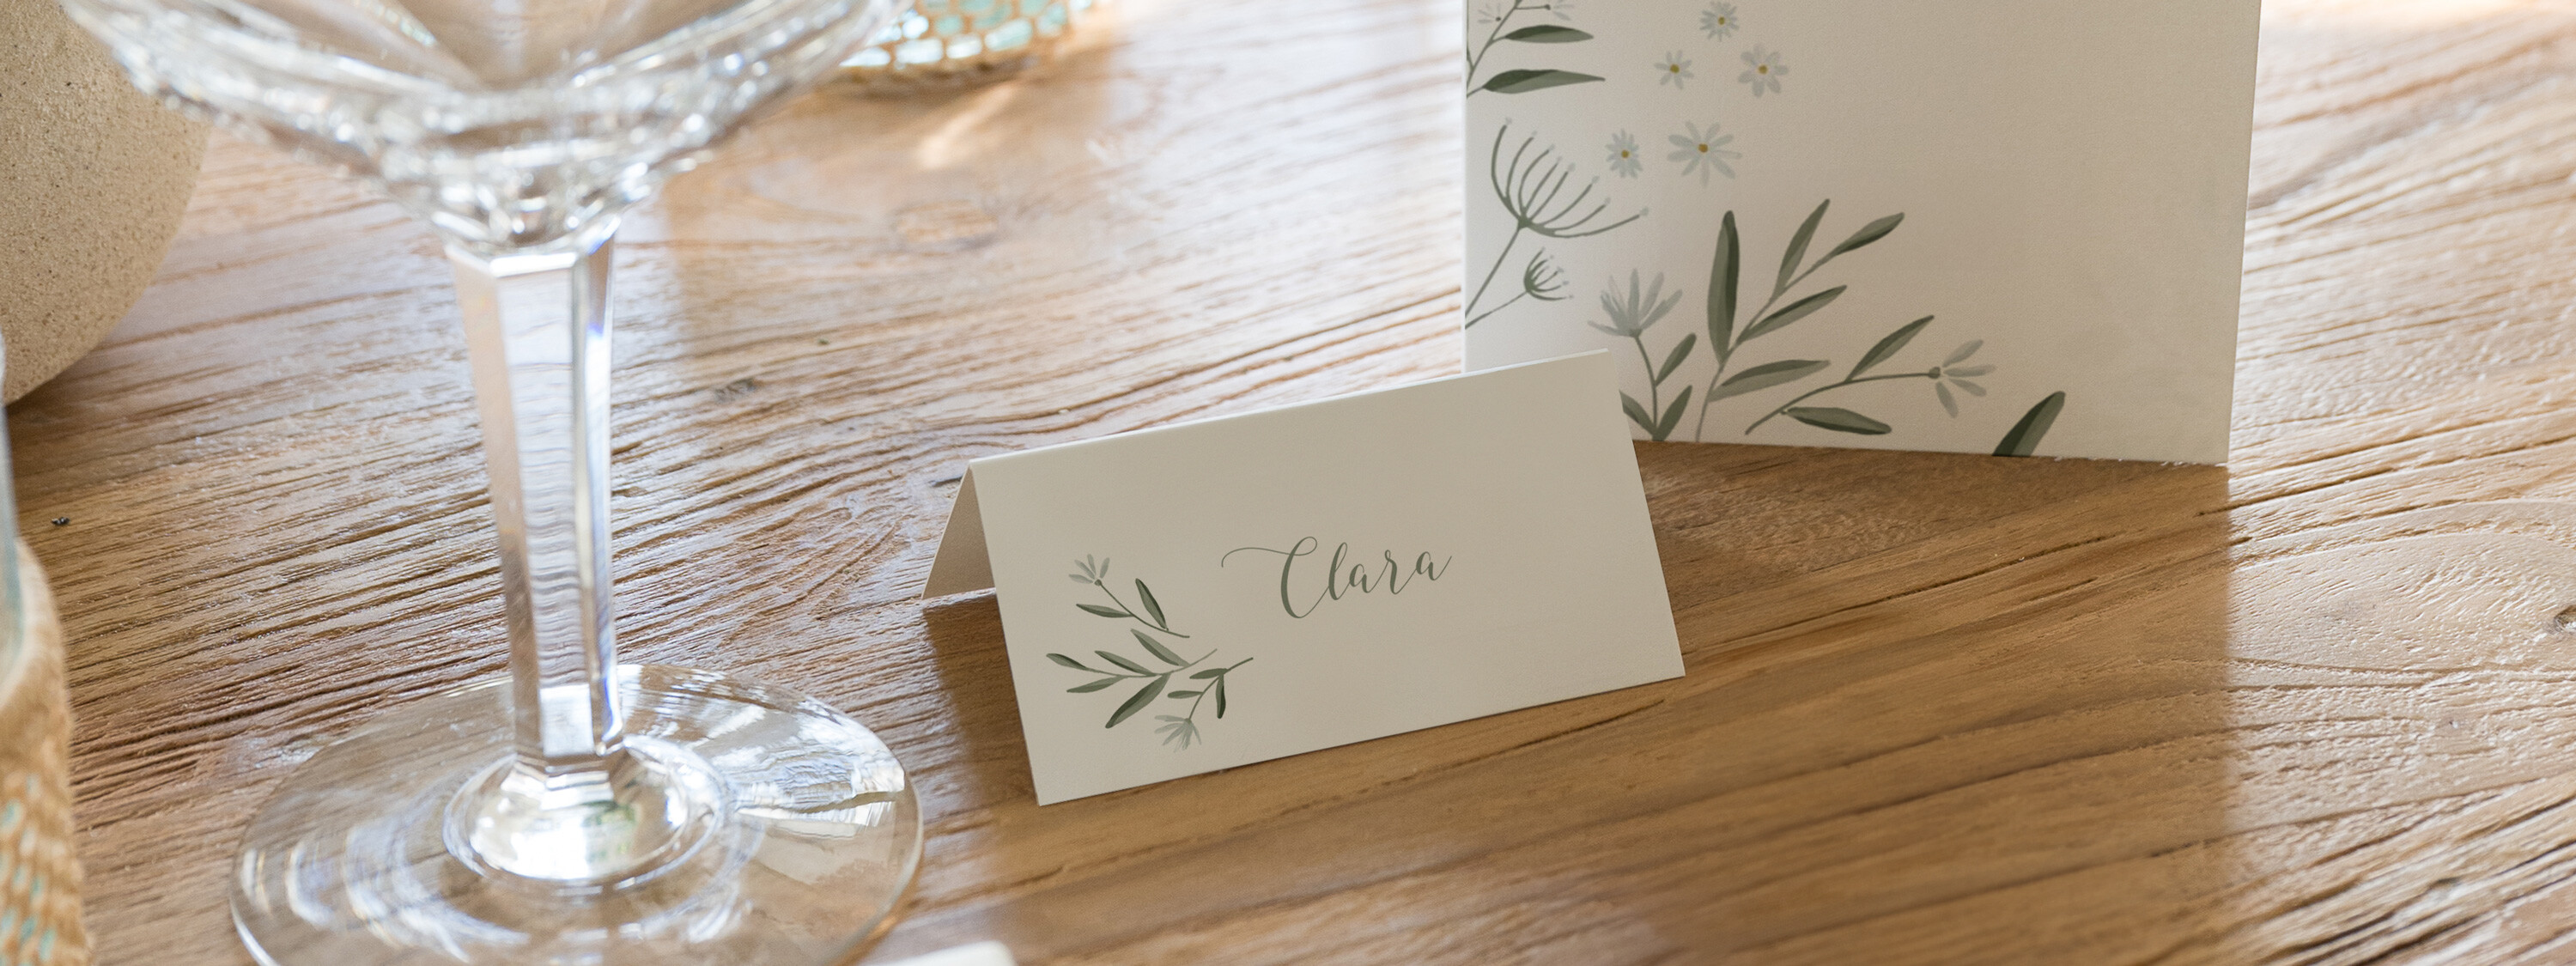 Red Wedding Place Cards